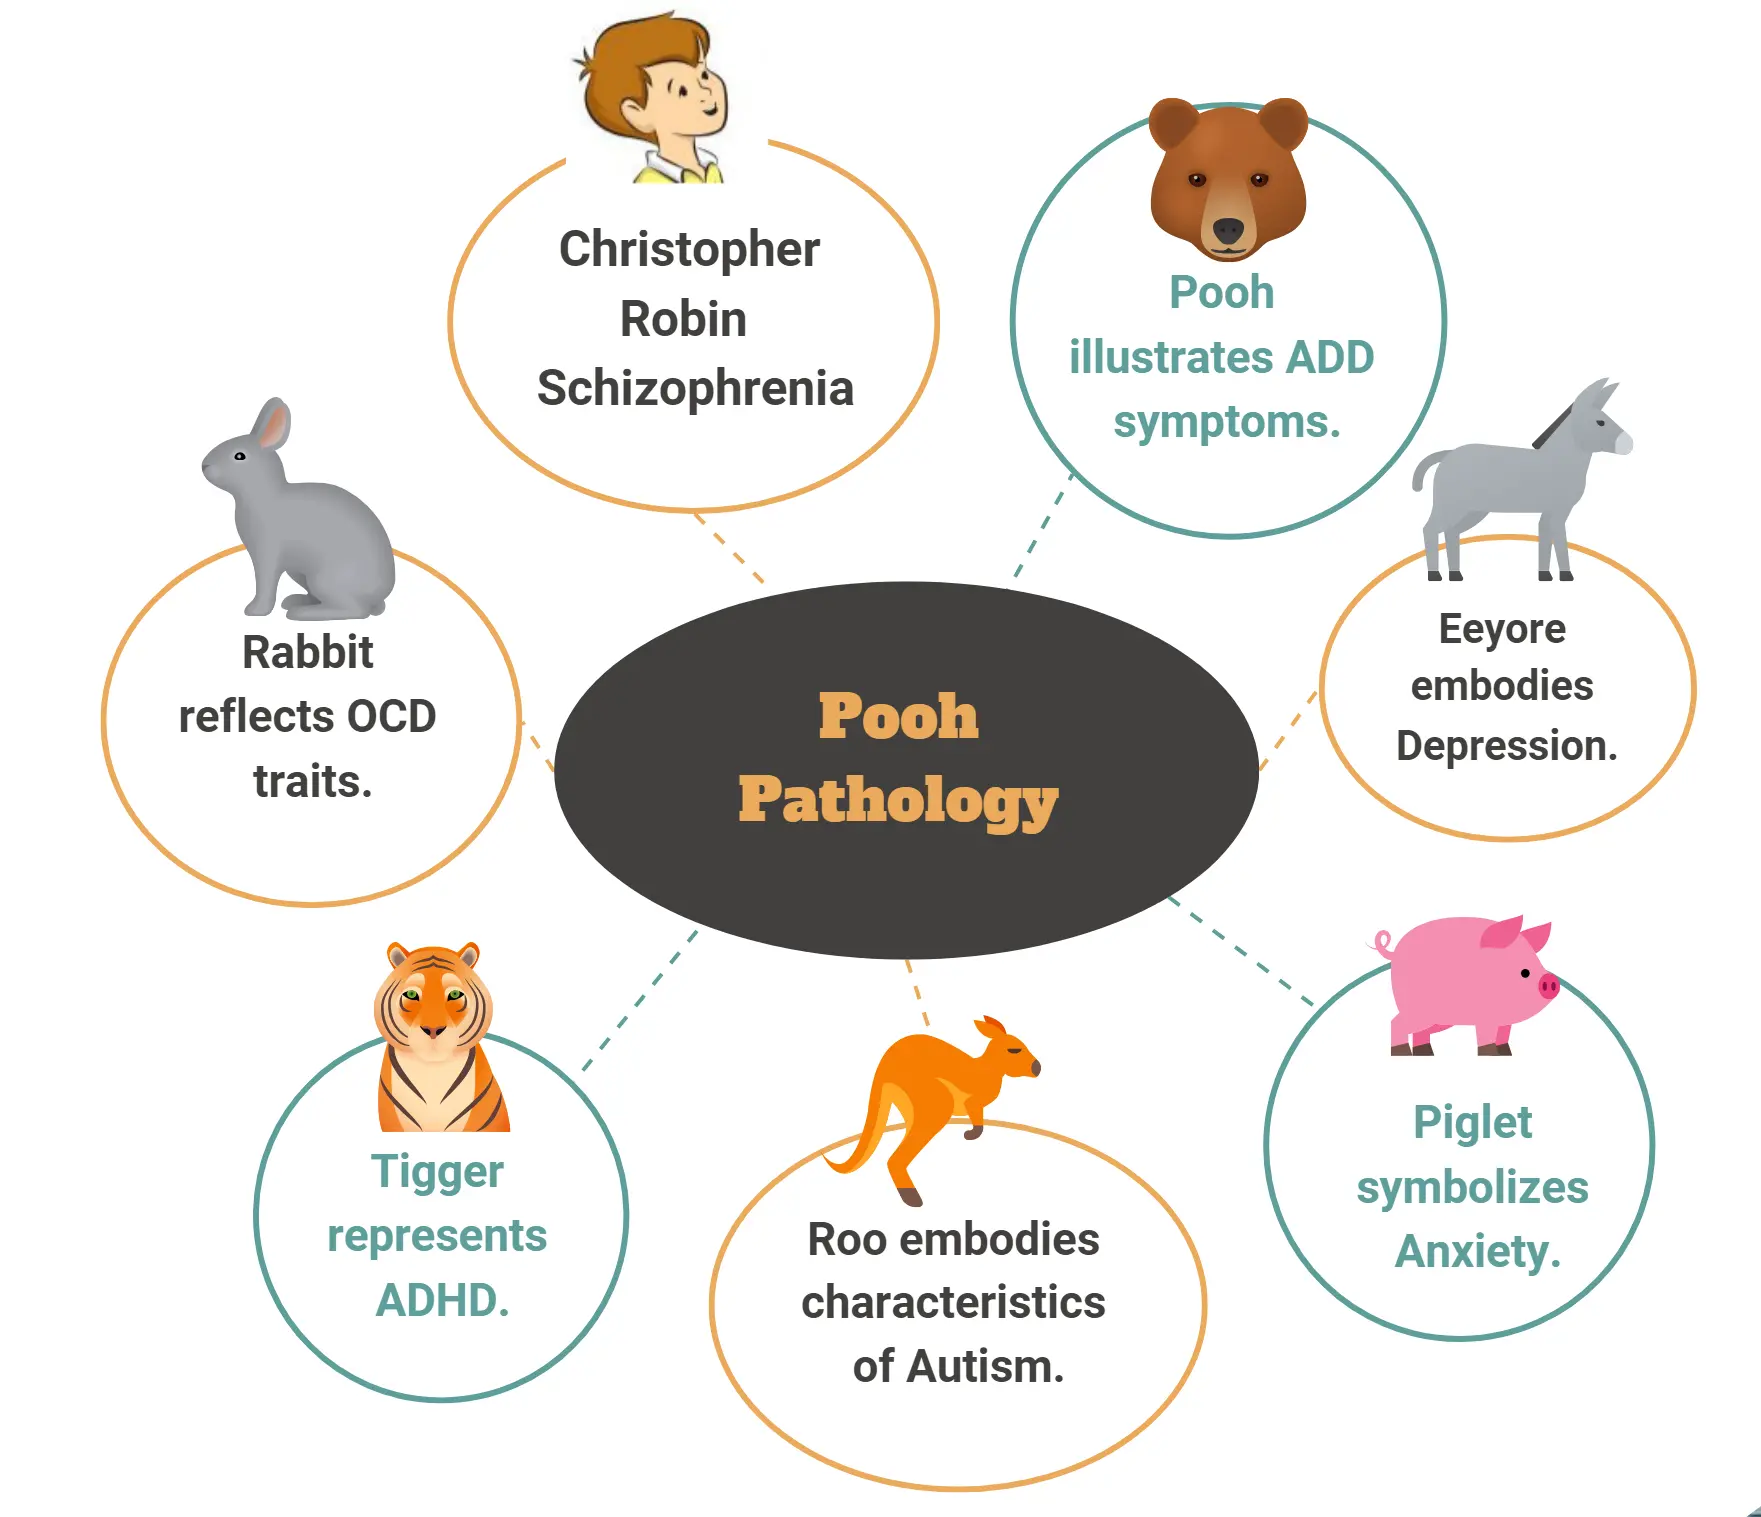 Pooh pathology test - which Winnie the Pooh character